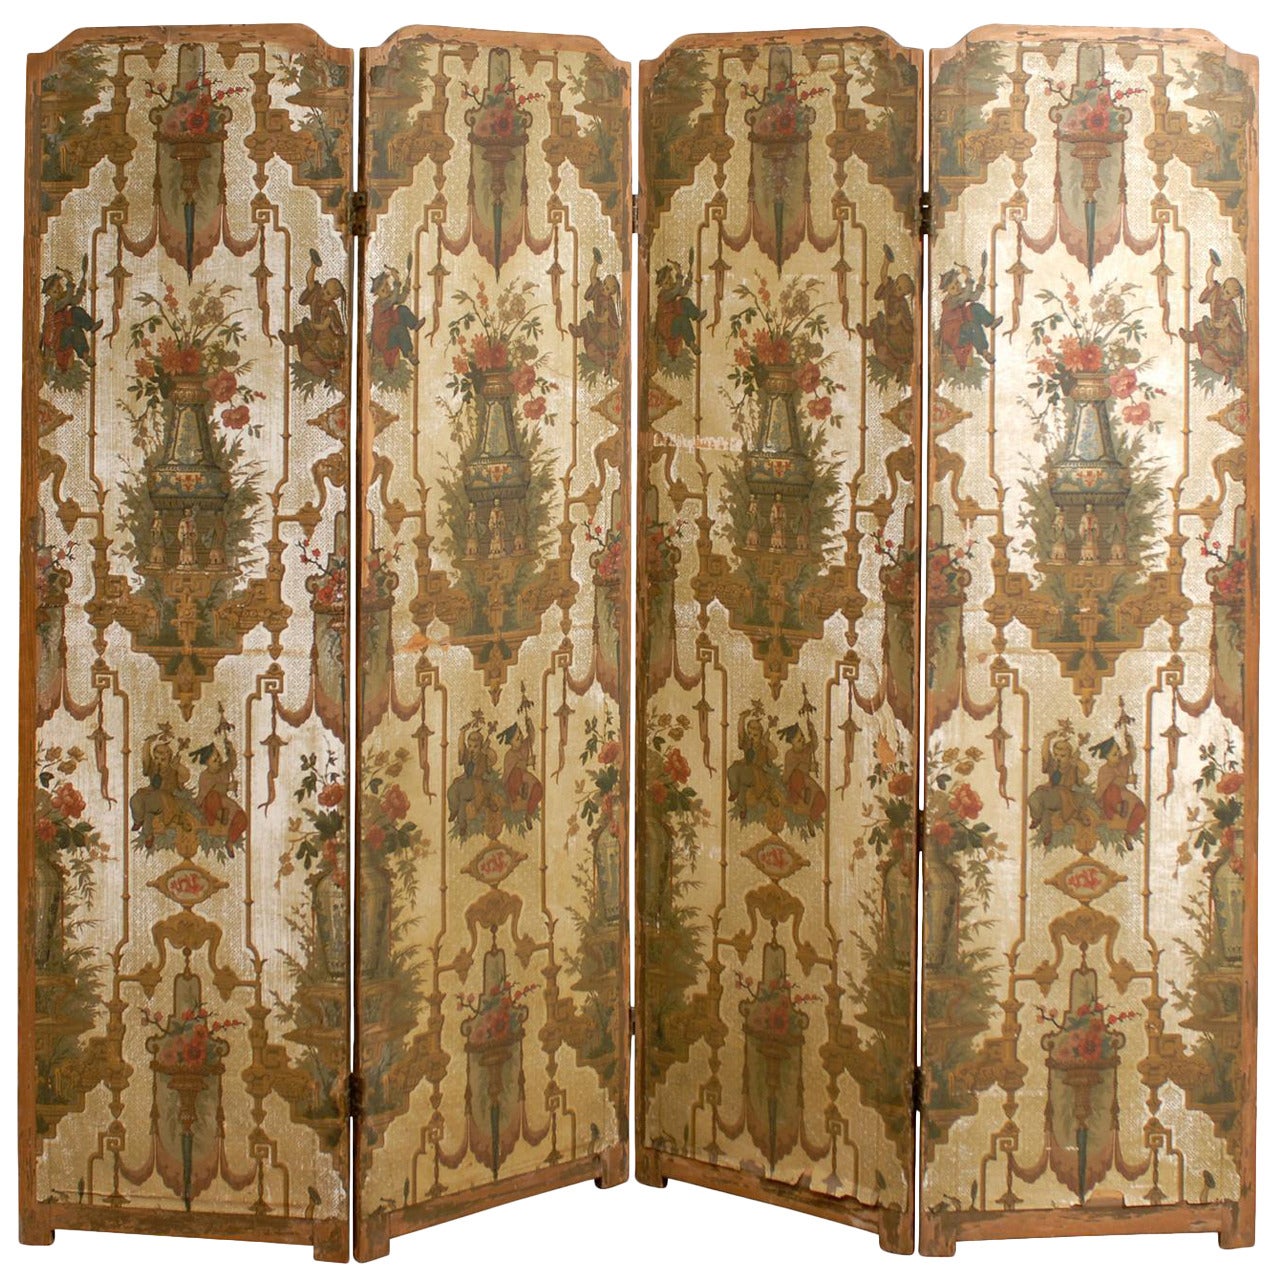 19th Century French Folding Screen with Chinoiserie and Floral Design